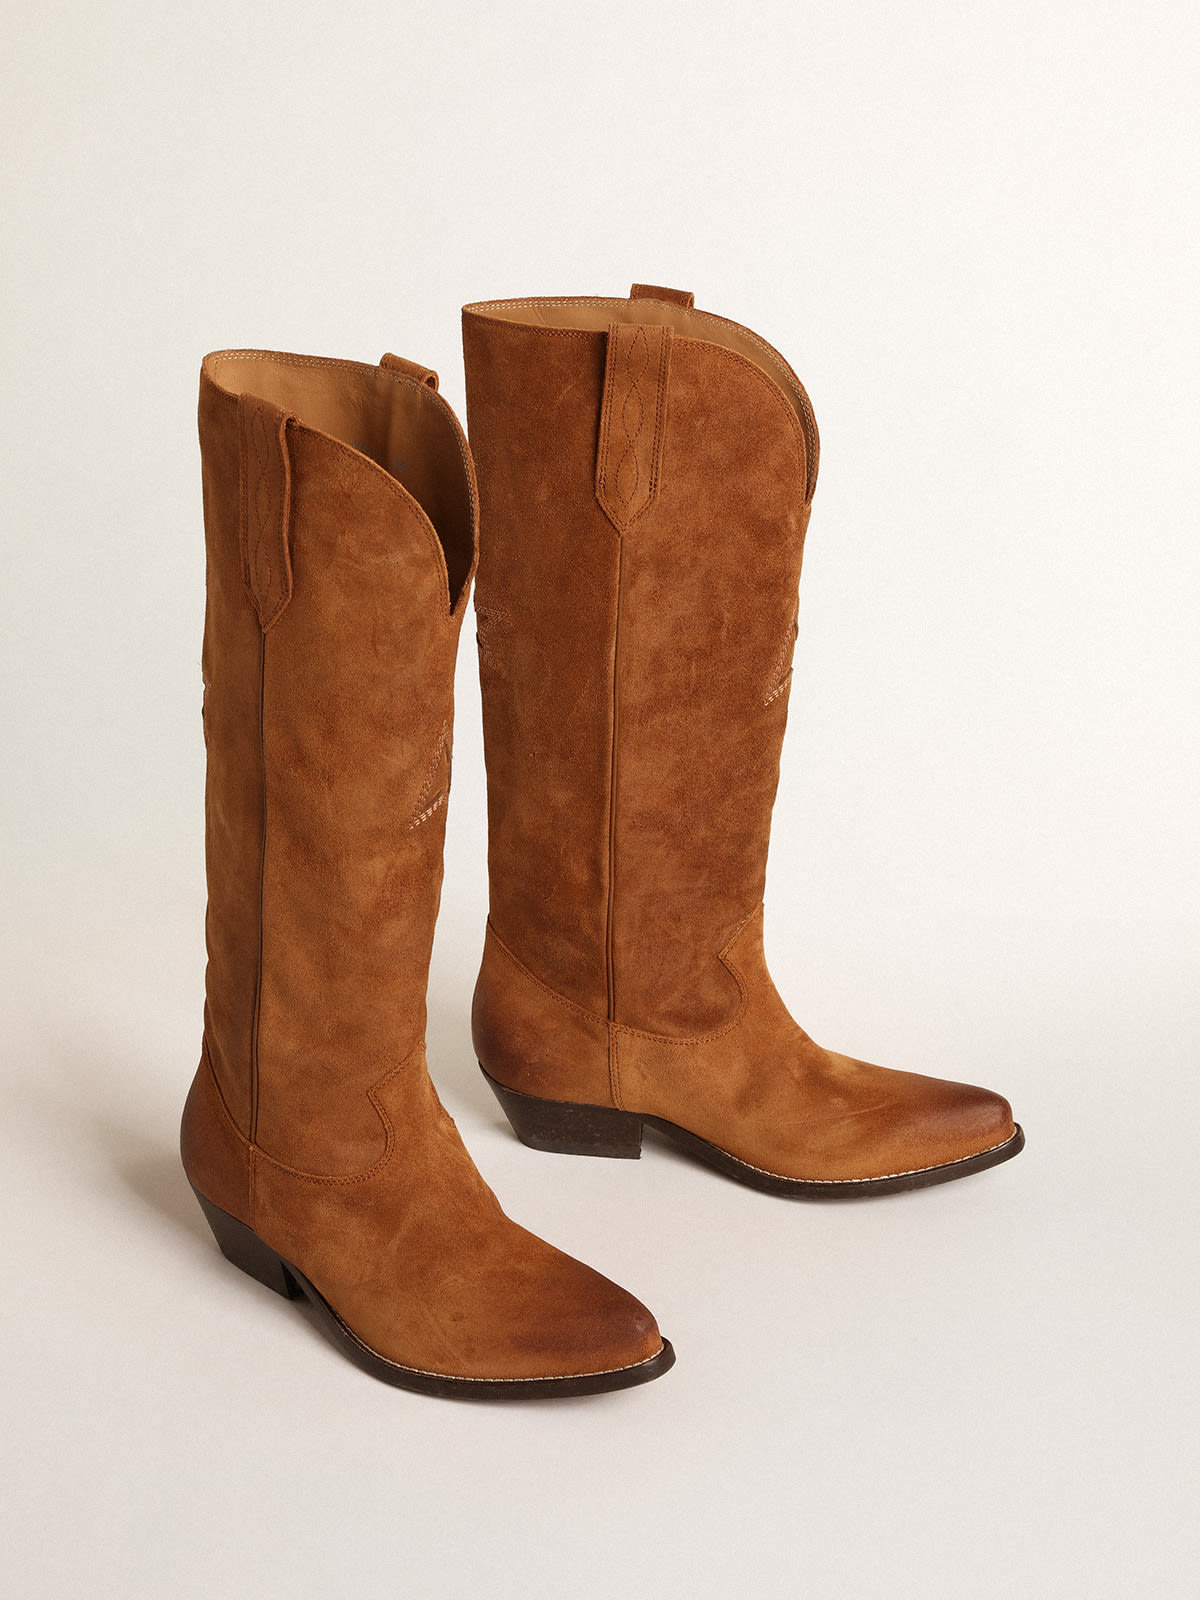 Golden Goose - Wish Star boots in cognac suede with tone-on-tone inlay star in 